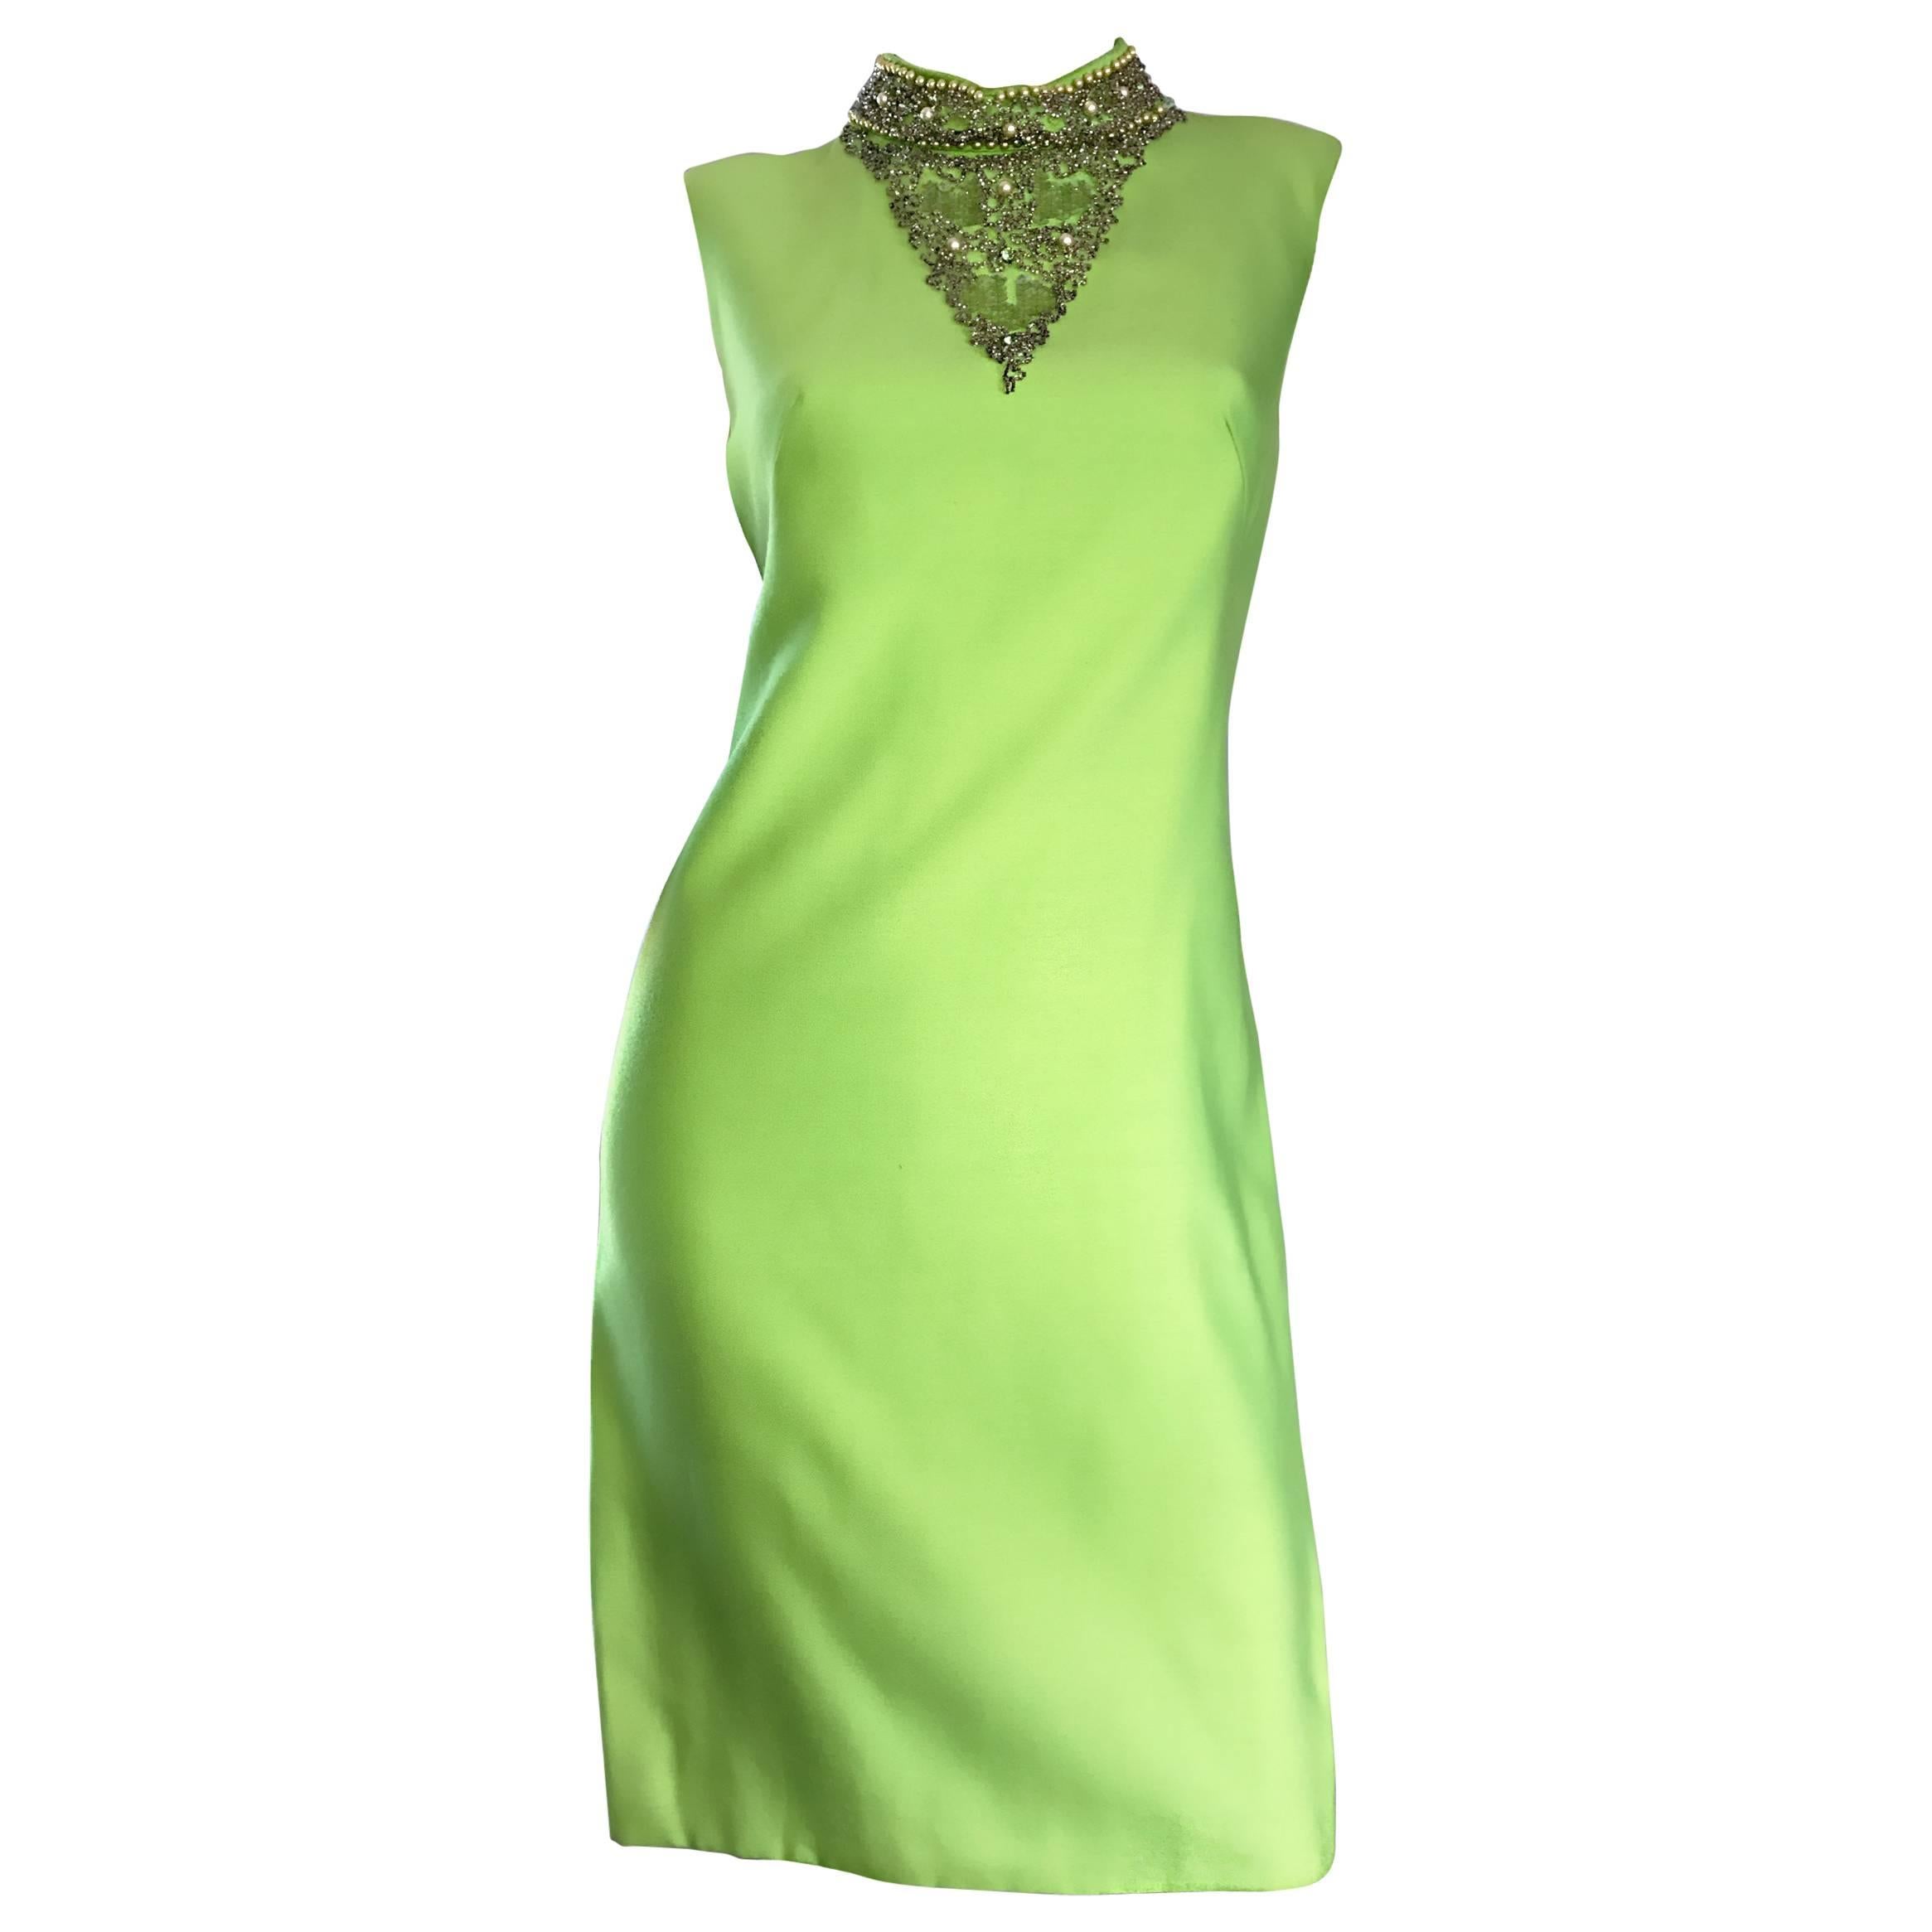 1960s Lime Green Vintage Beaded + Sequined 60s Bright Mod Shift Dress w/ Pearls